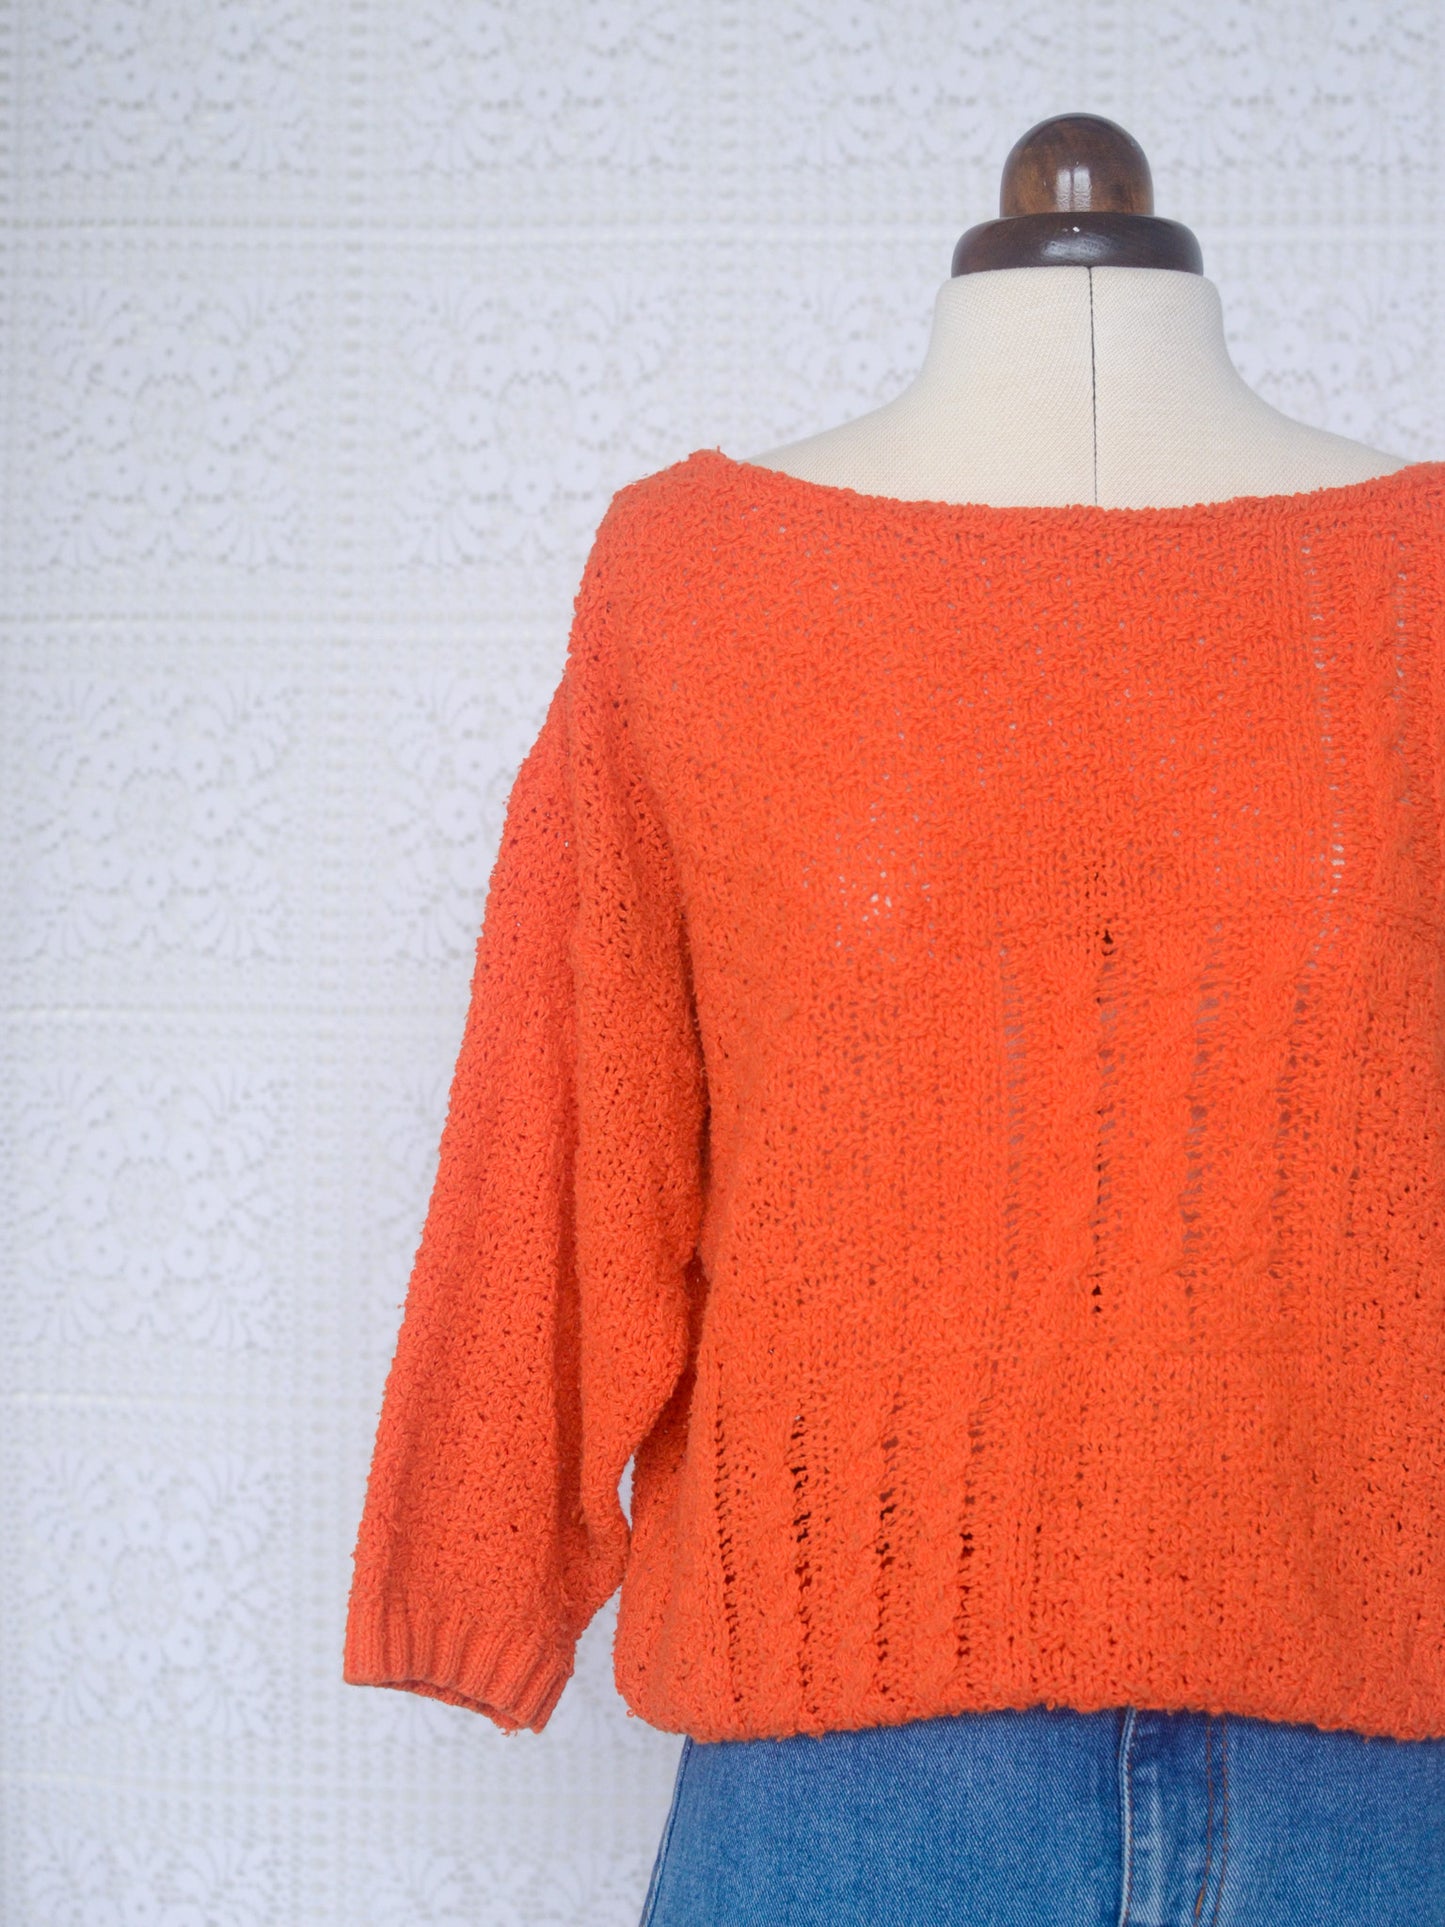 1980s British Home Stores orange 3/4 length sleeve knitted jumper